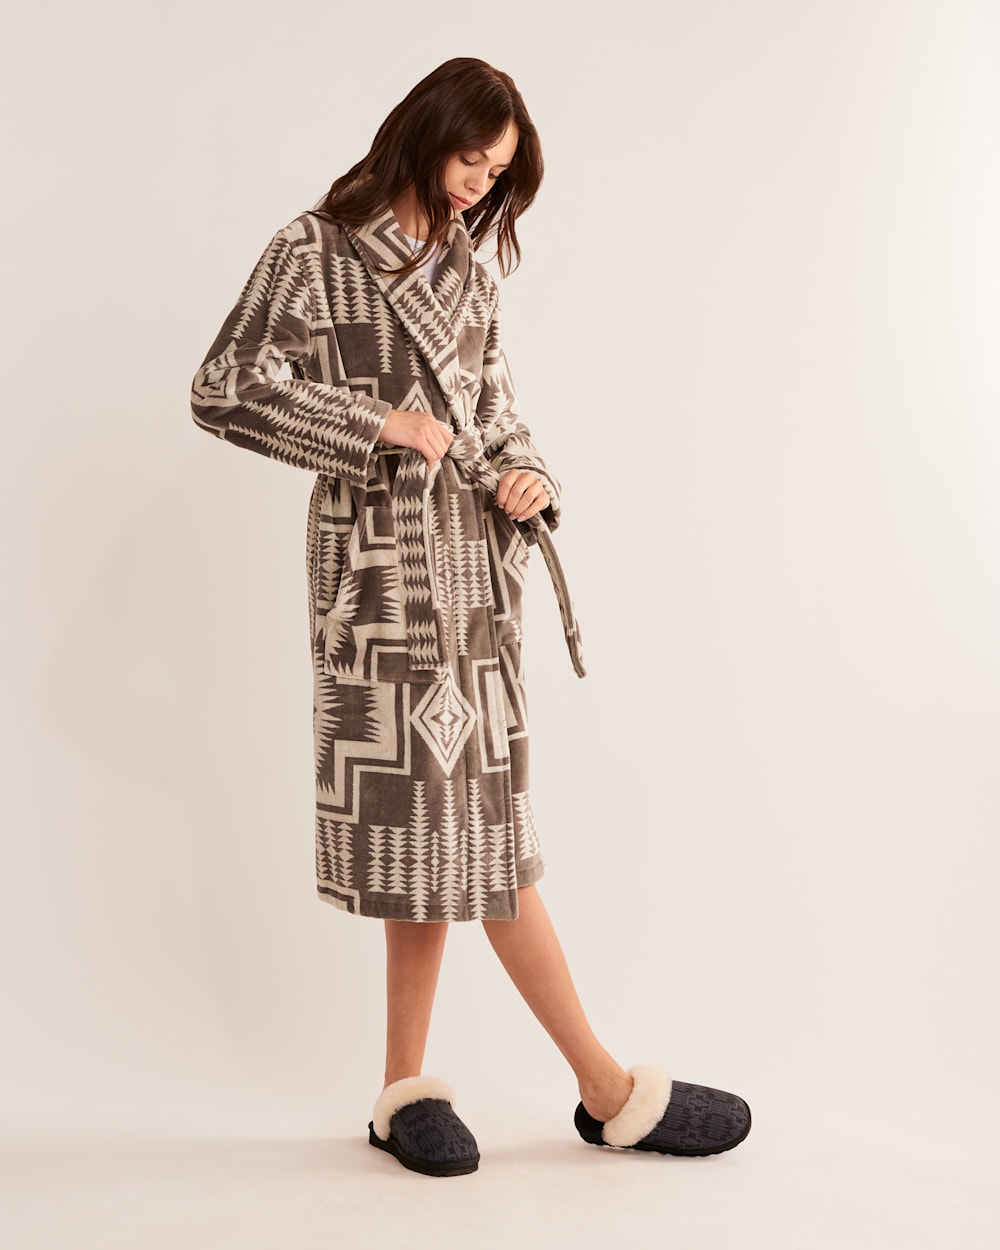 ALTERNATE VIEW OF WOMEN'S COTTON TERRY VELOUR ROBE IN HARDING GREY image number 5